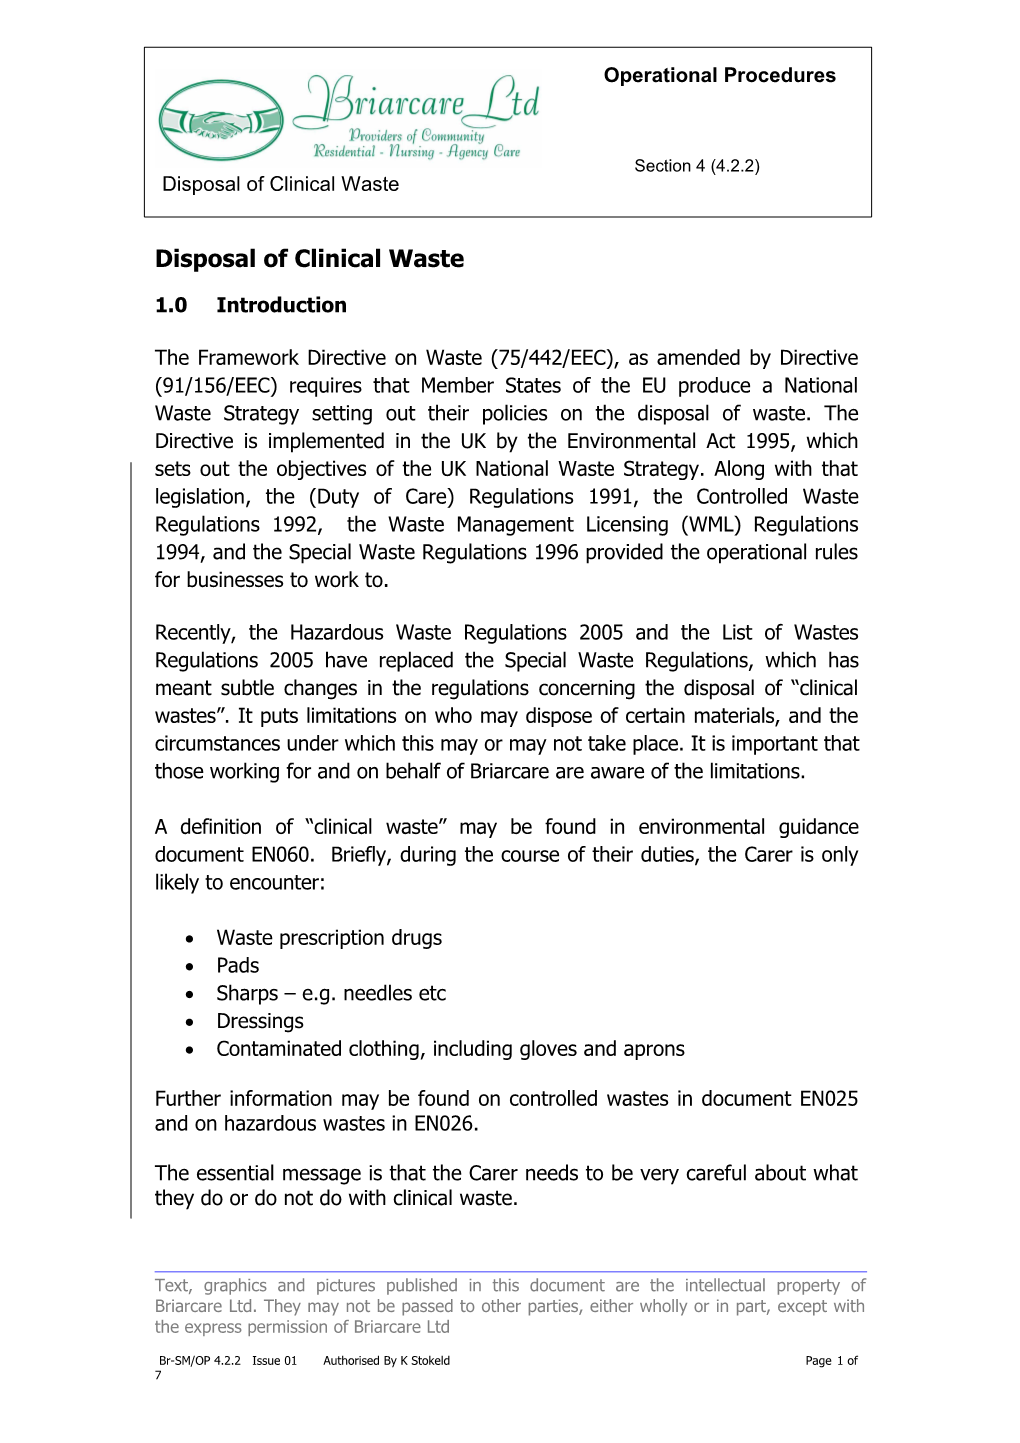 Disposal of Clinical Waste